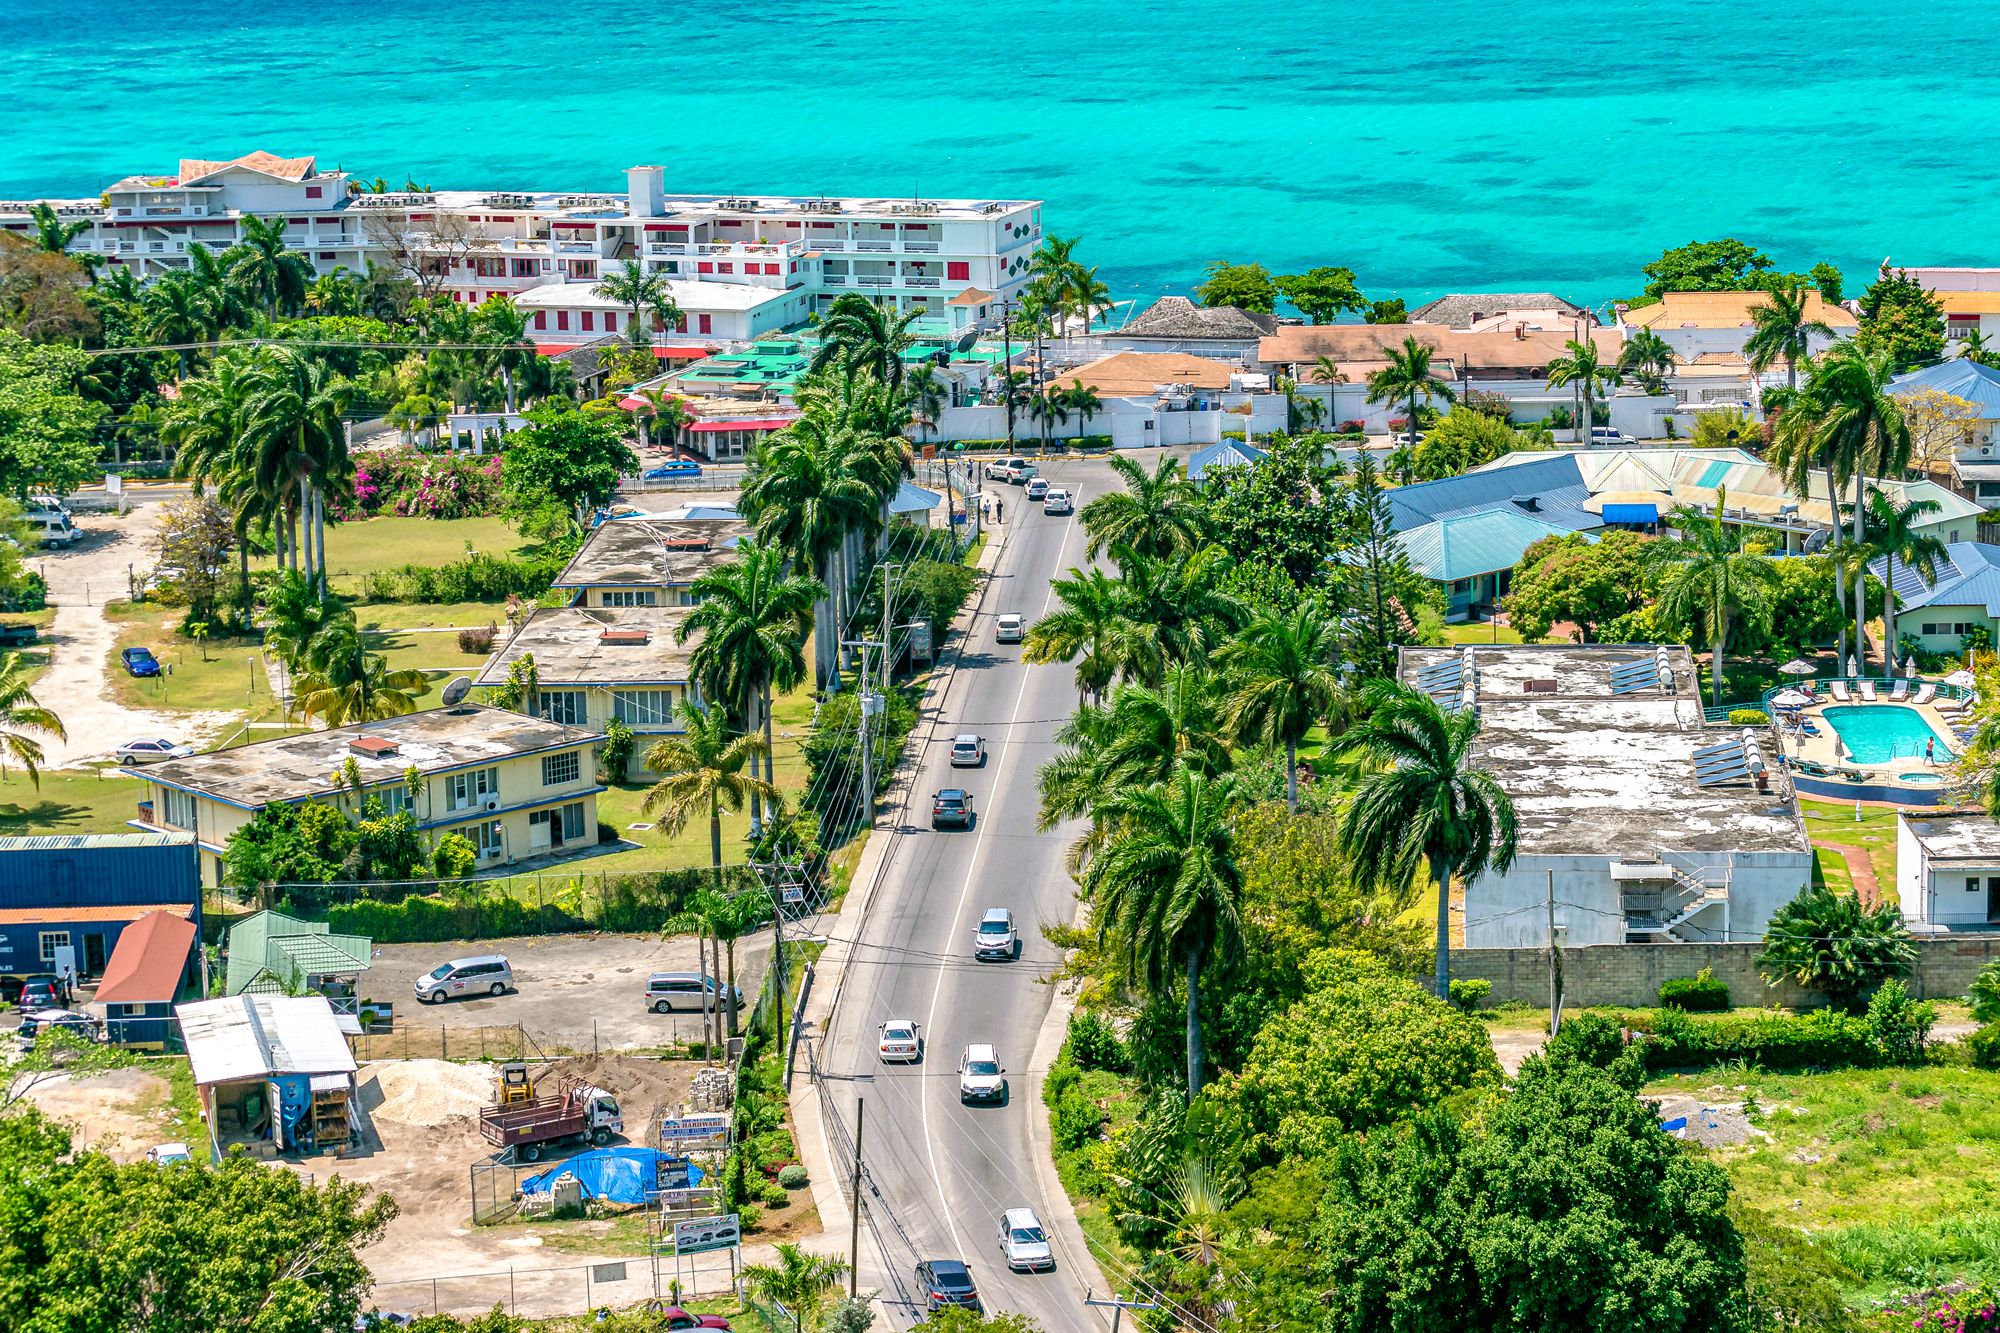 28 Helpful Travel Tips For Jamaica | Dos & Don’ts | BEACHES